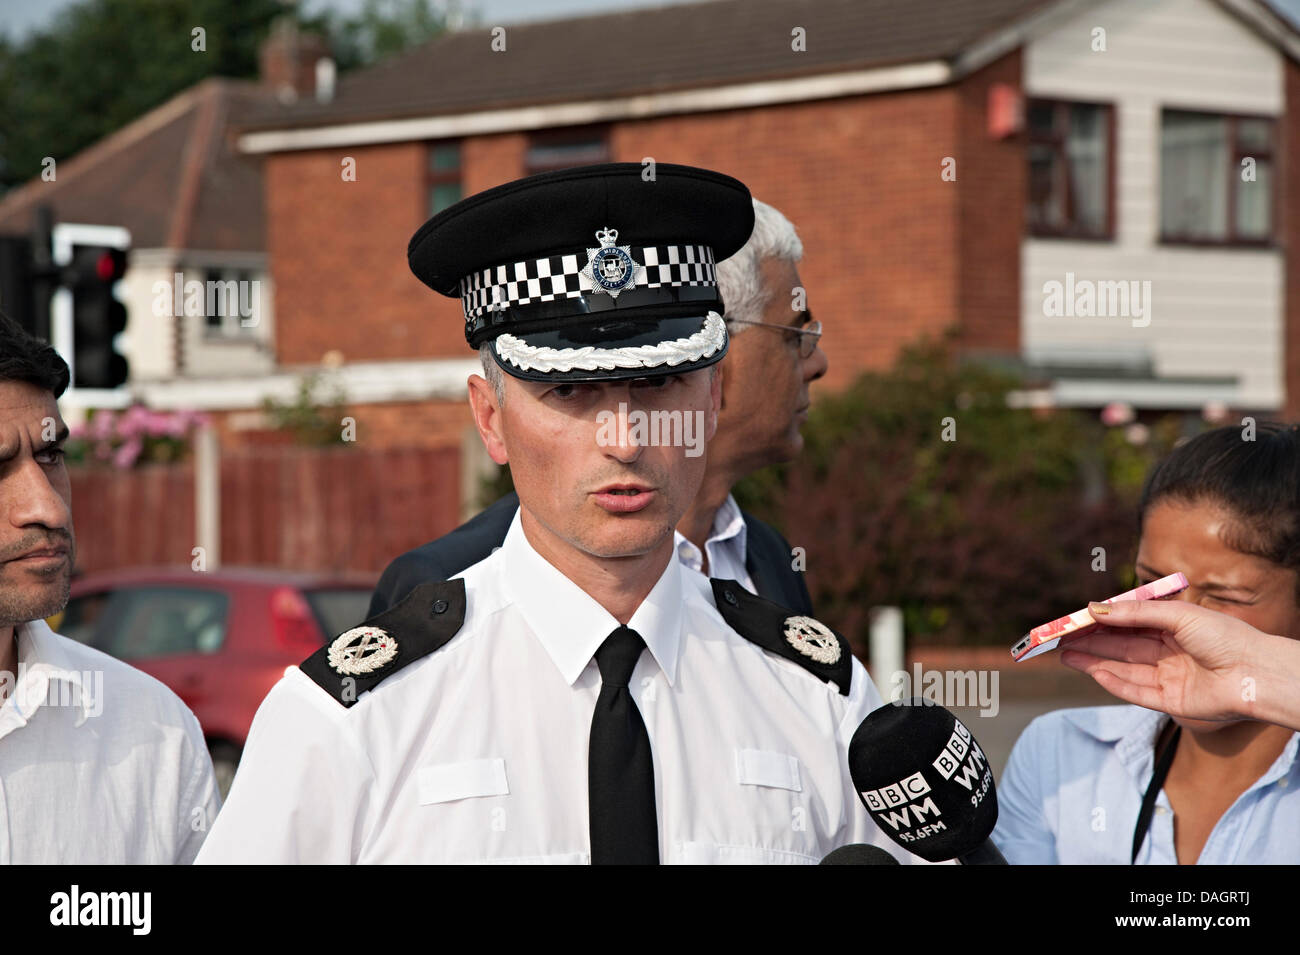 Tipton, West Midlands, UK. 12th July 2013. Mosque nail bomb.gareth cann assistant chief constable from west midlands police spea Stock Photo